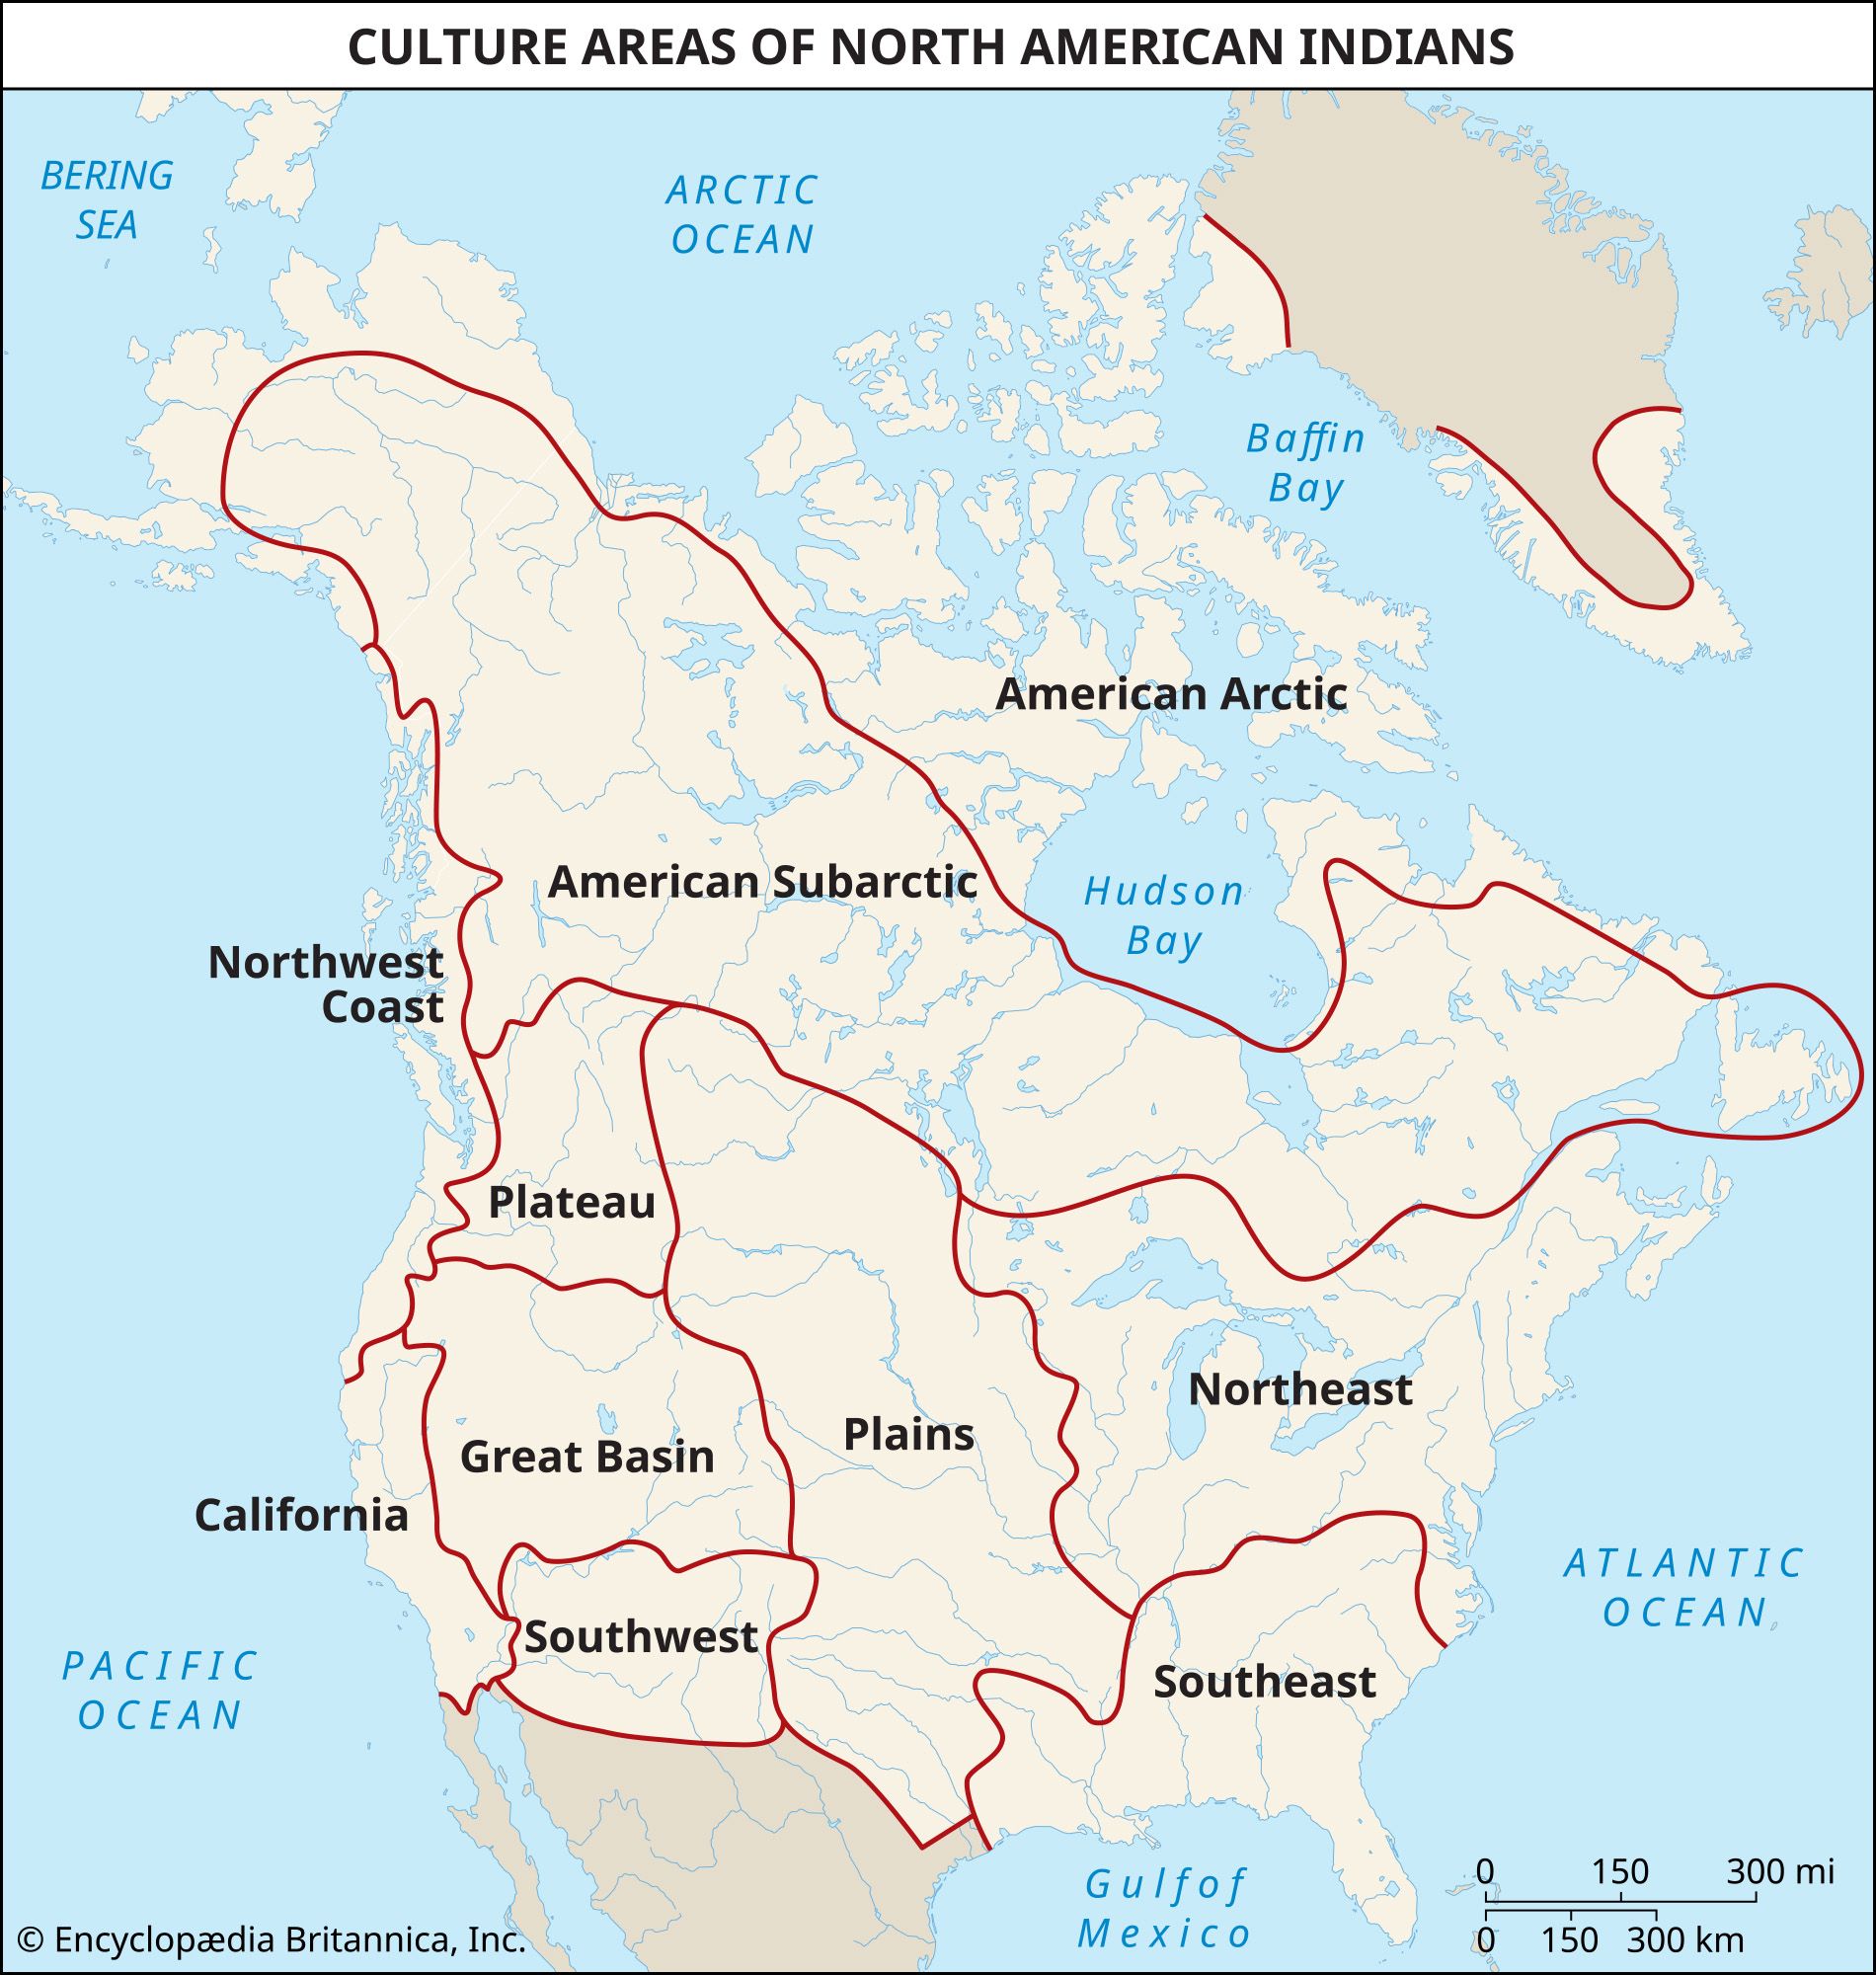 Culture areas of North American Indians